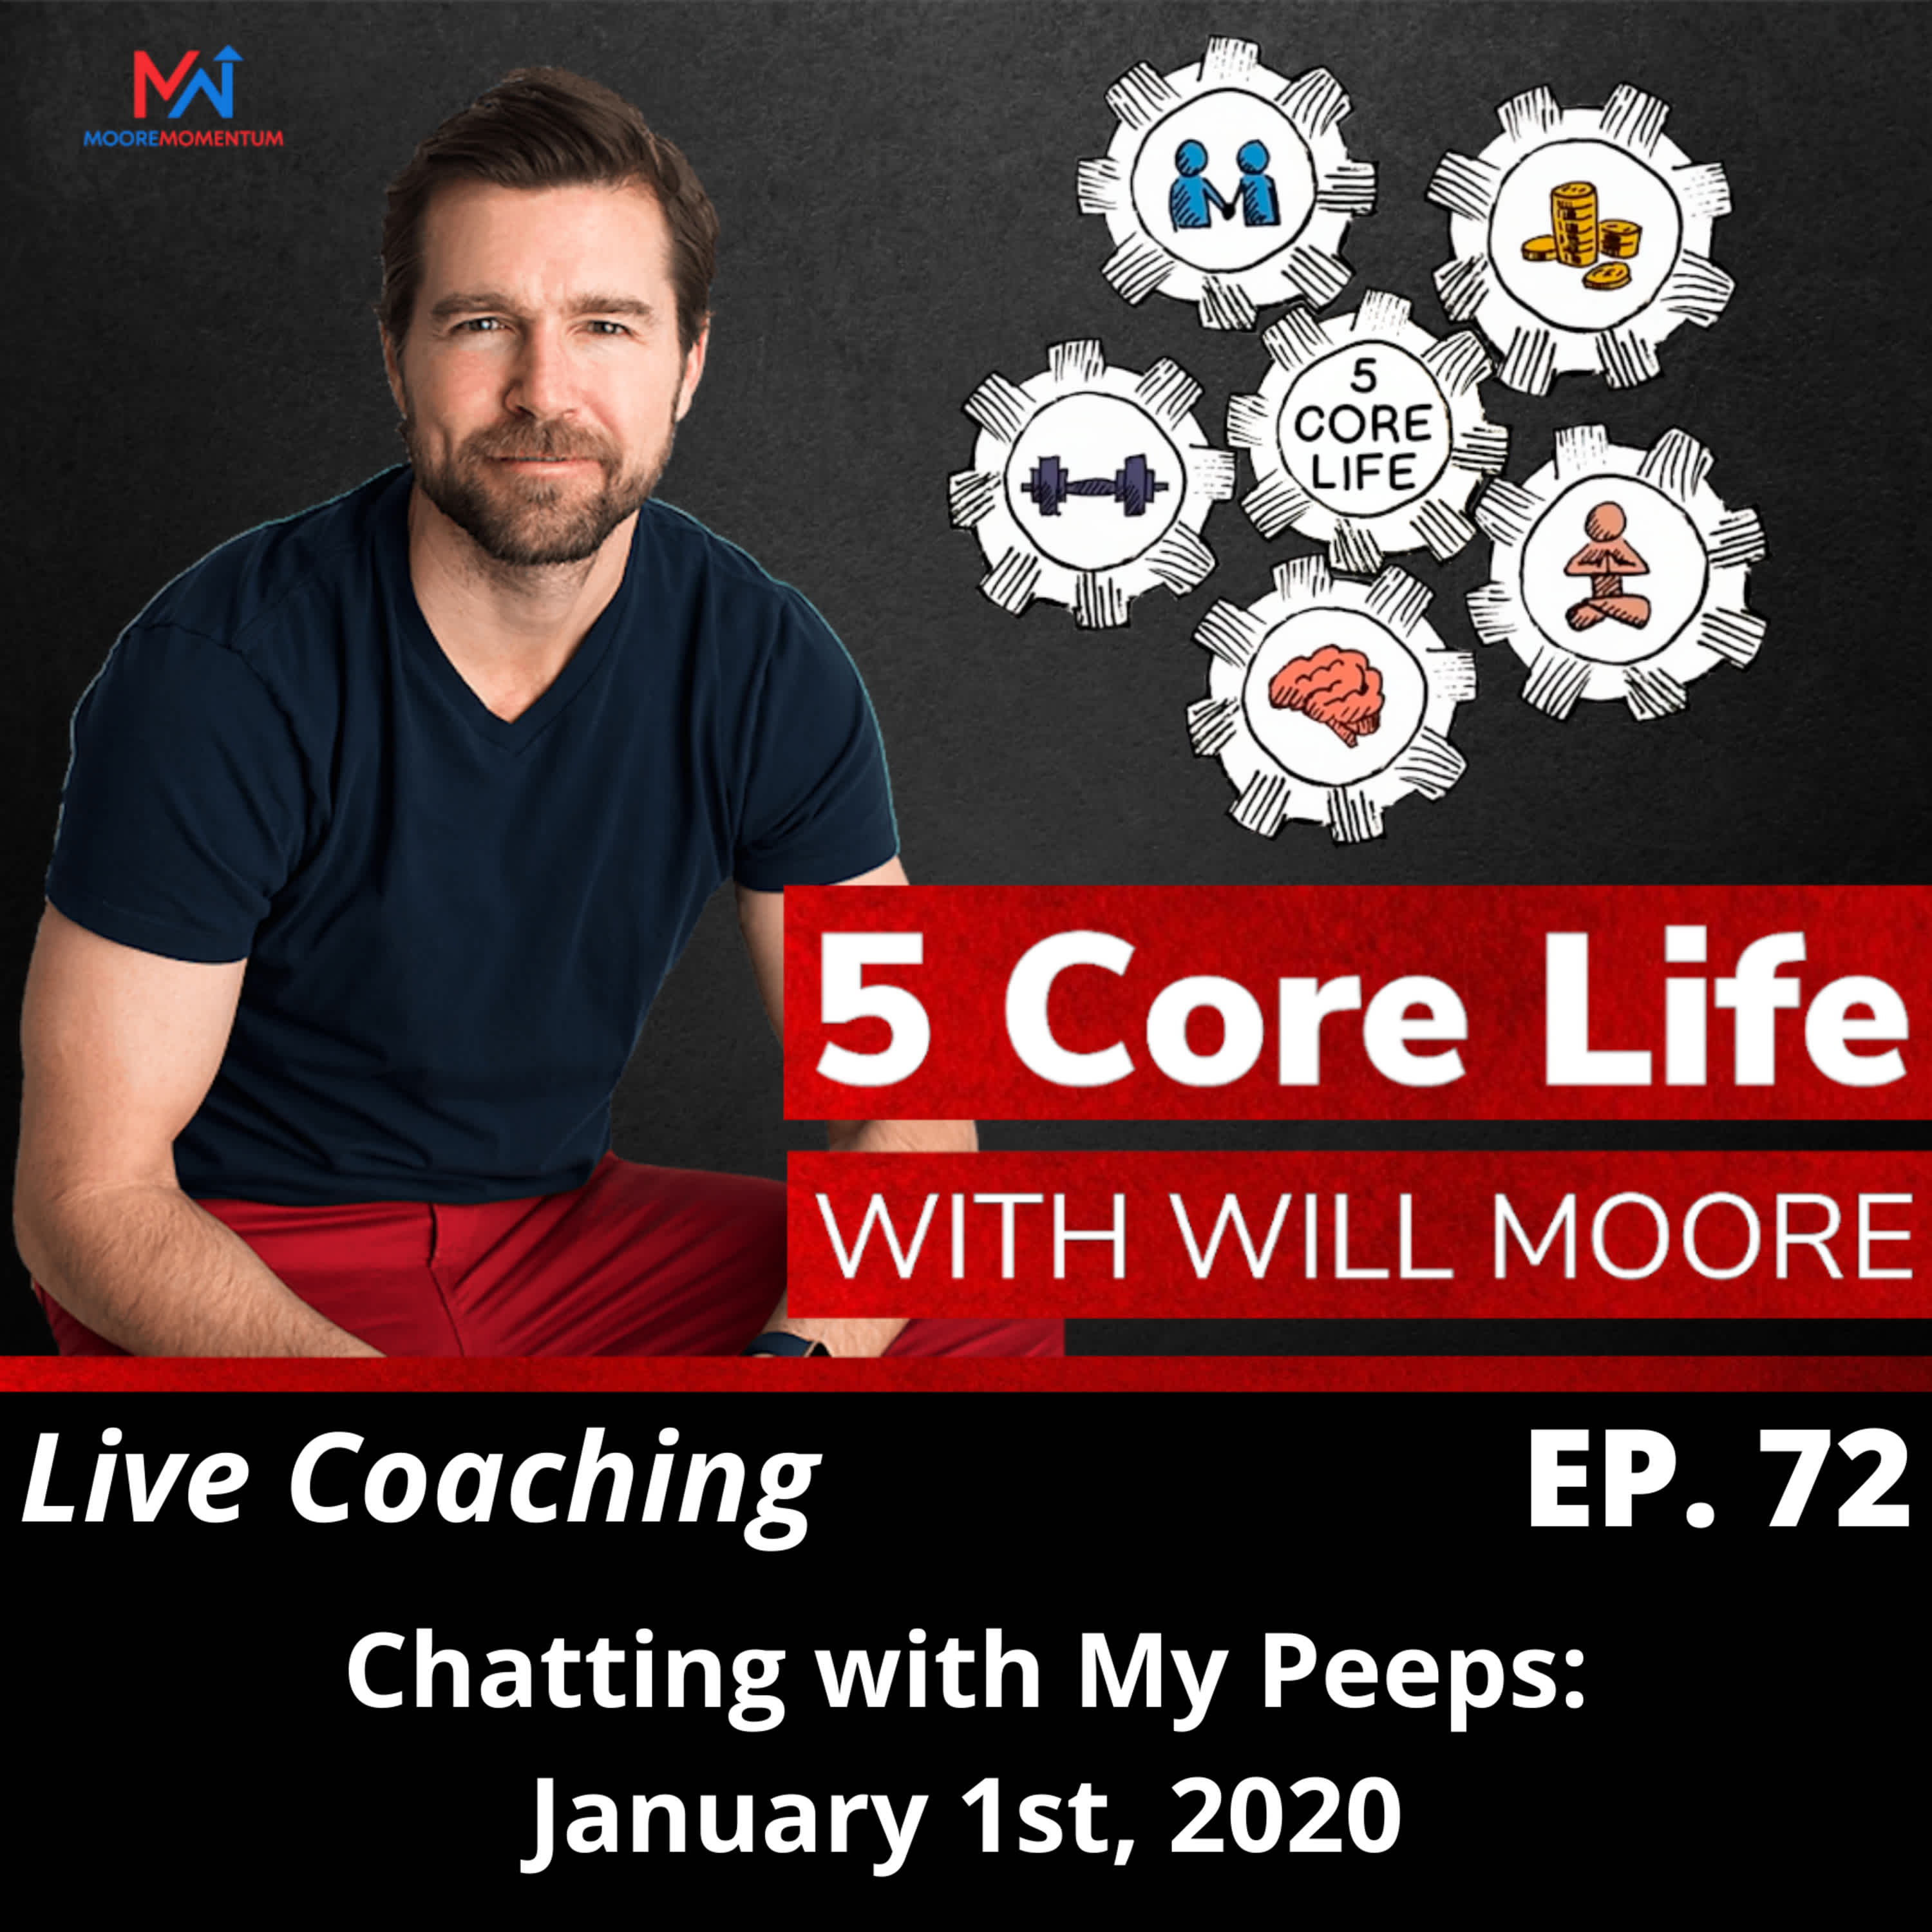 Chatting with My Peeps! 5 Core Life Coaching: January 1st, 2021